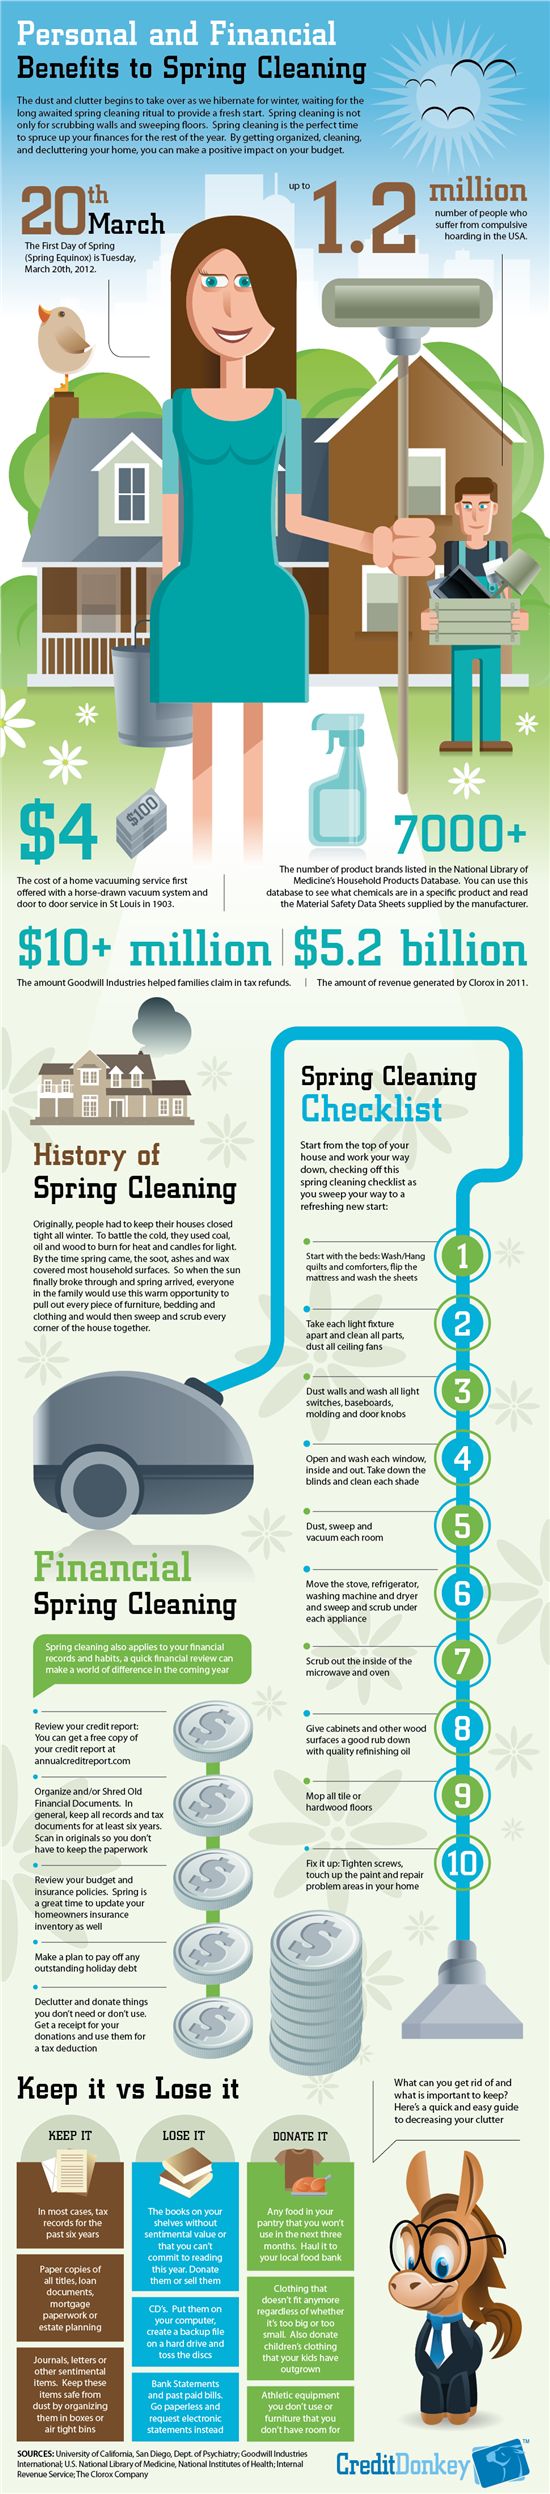 financial benefits to spring cleaning